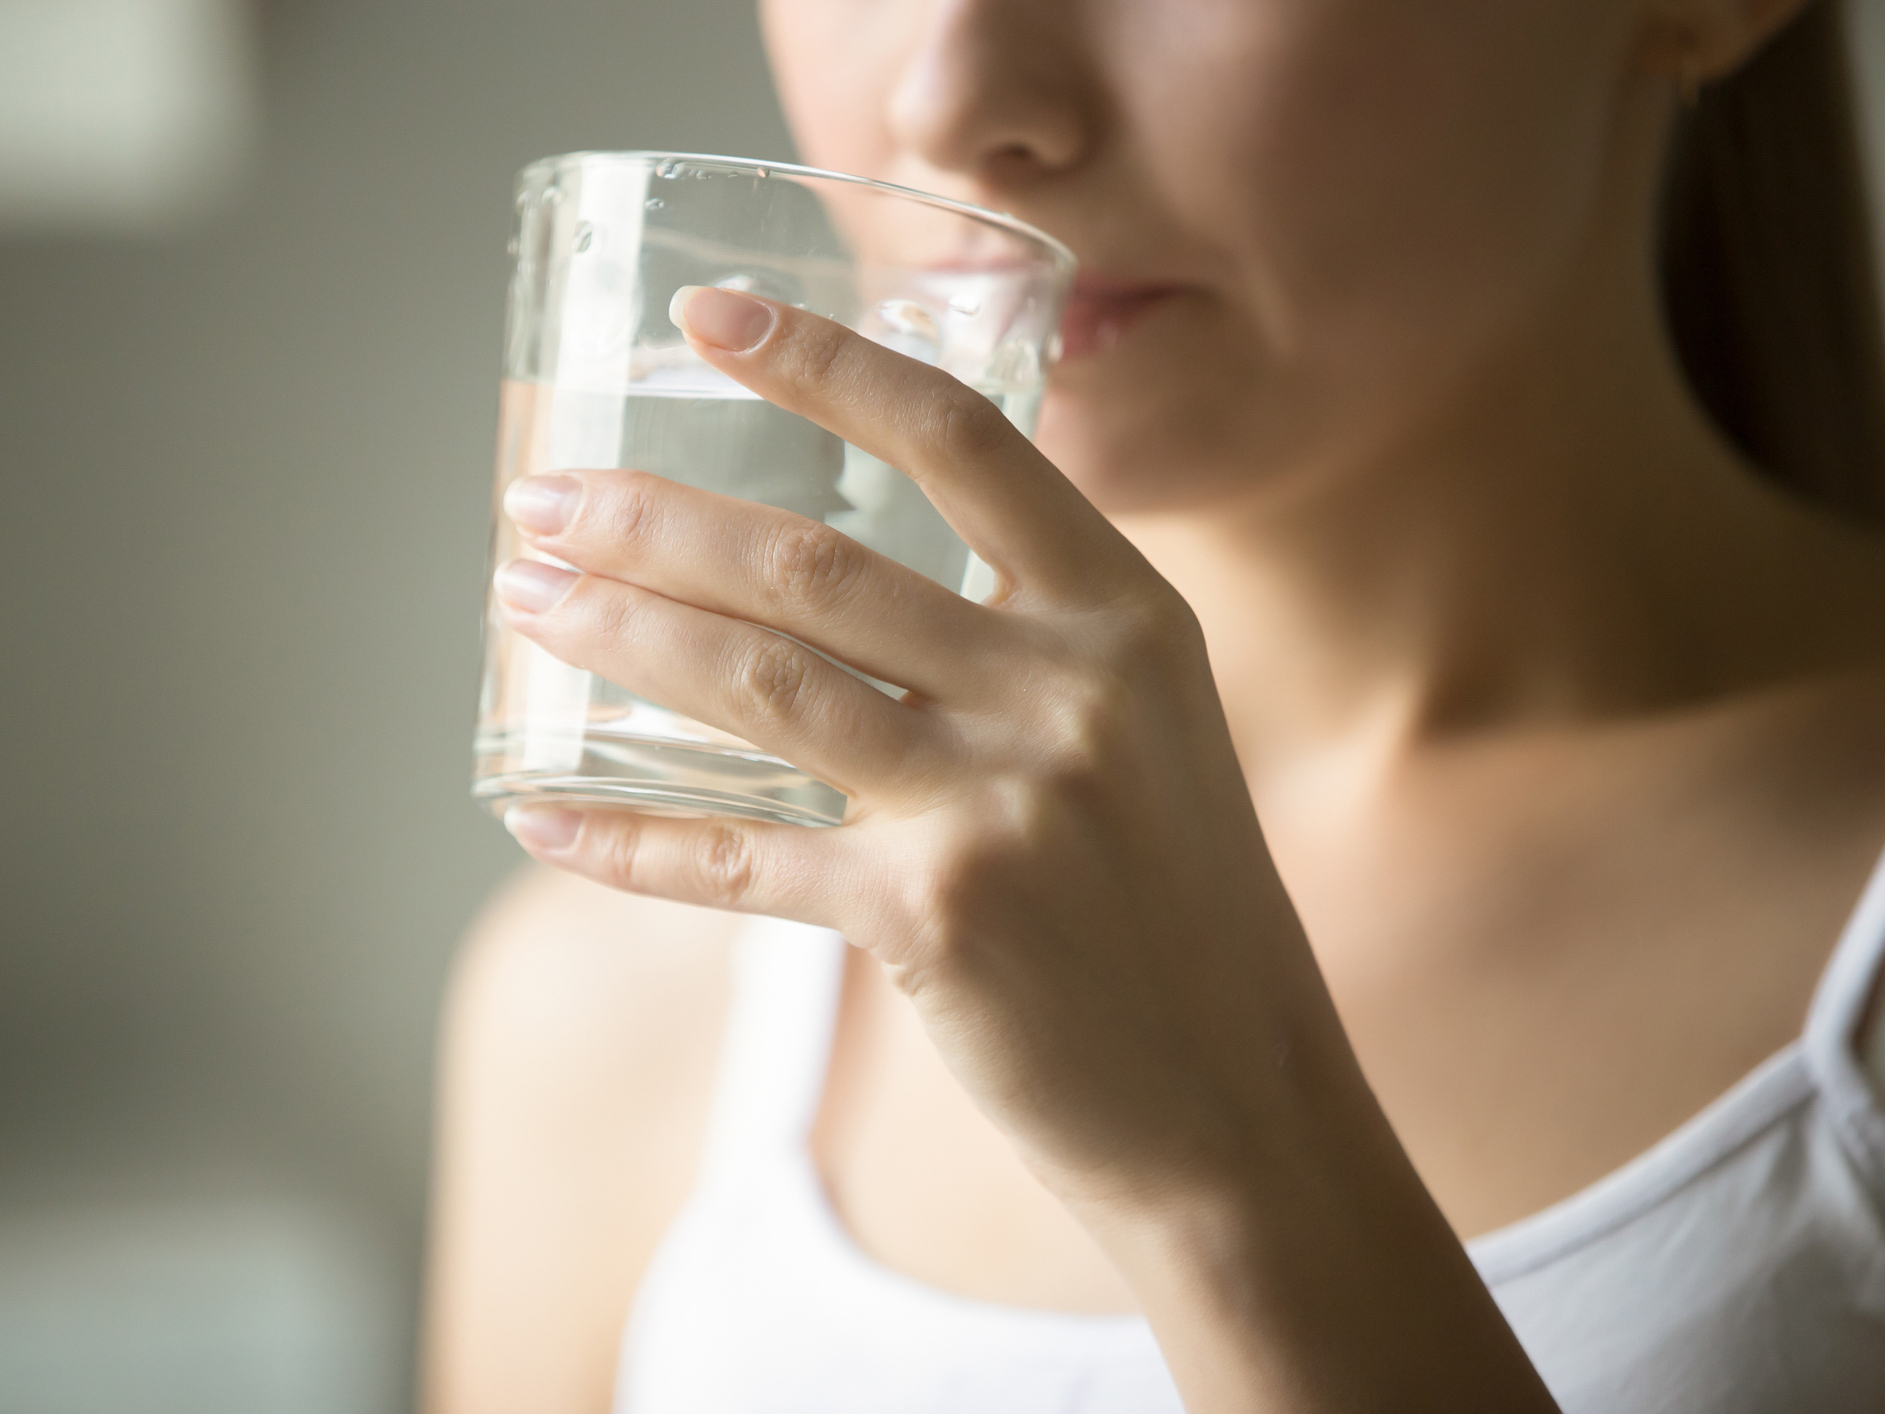 The forever chemicals contaminating your drinking water